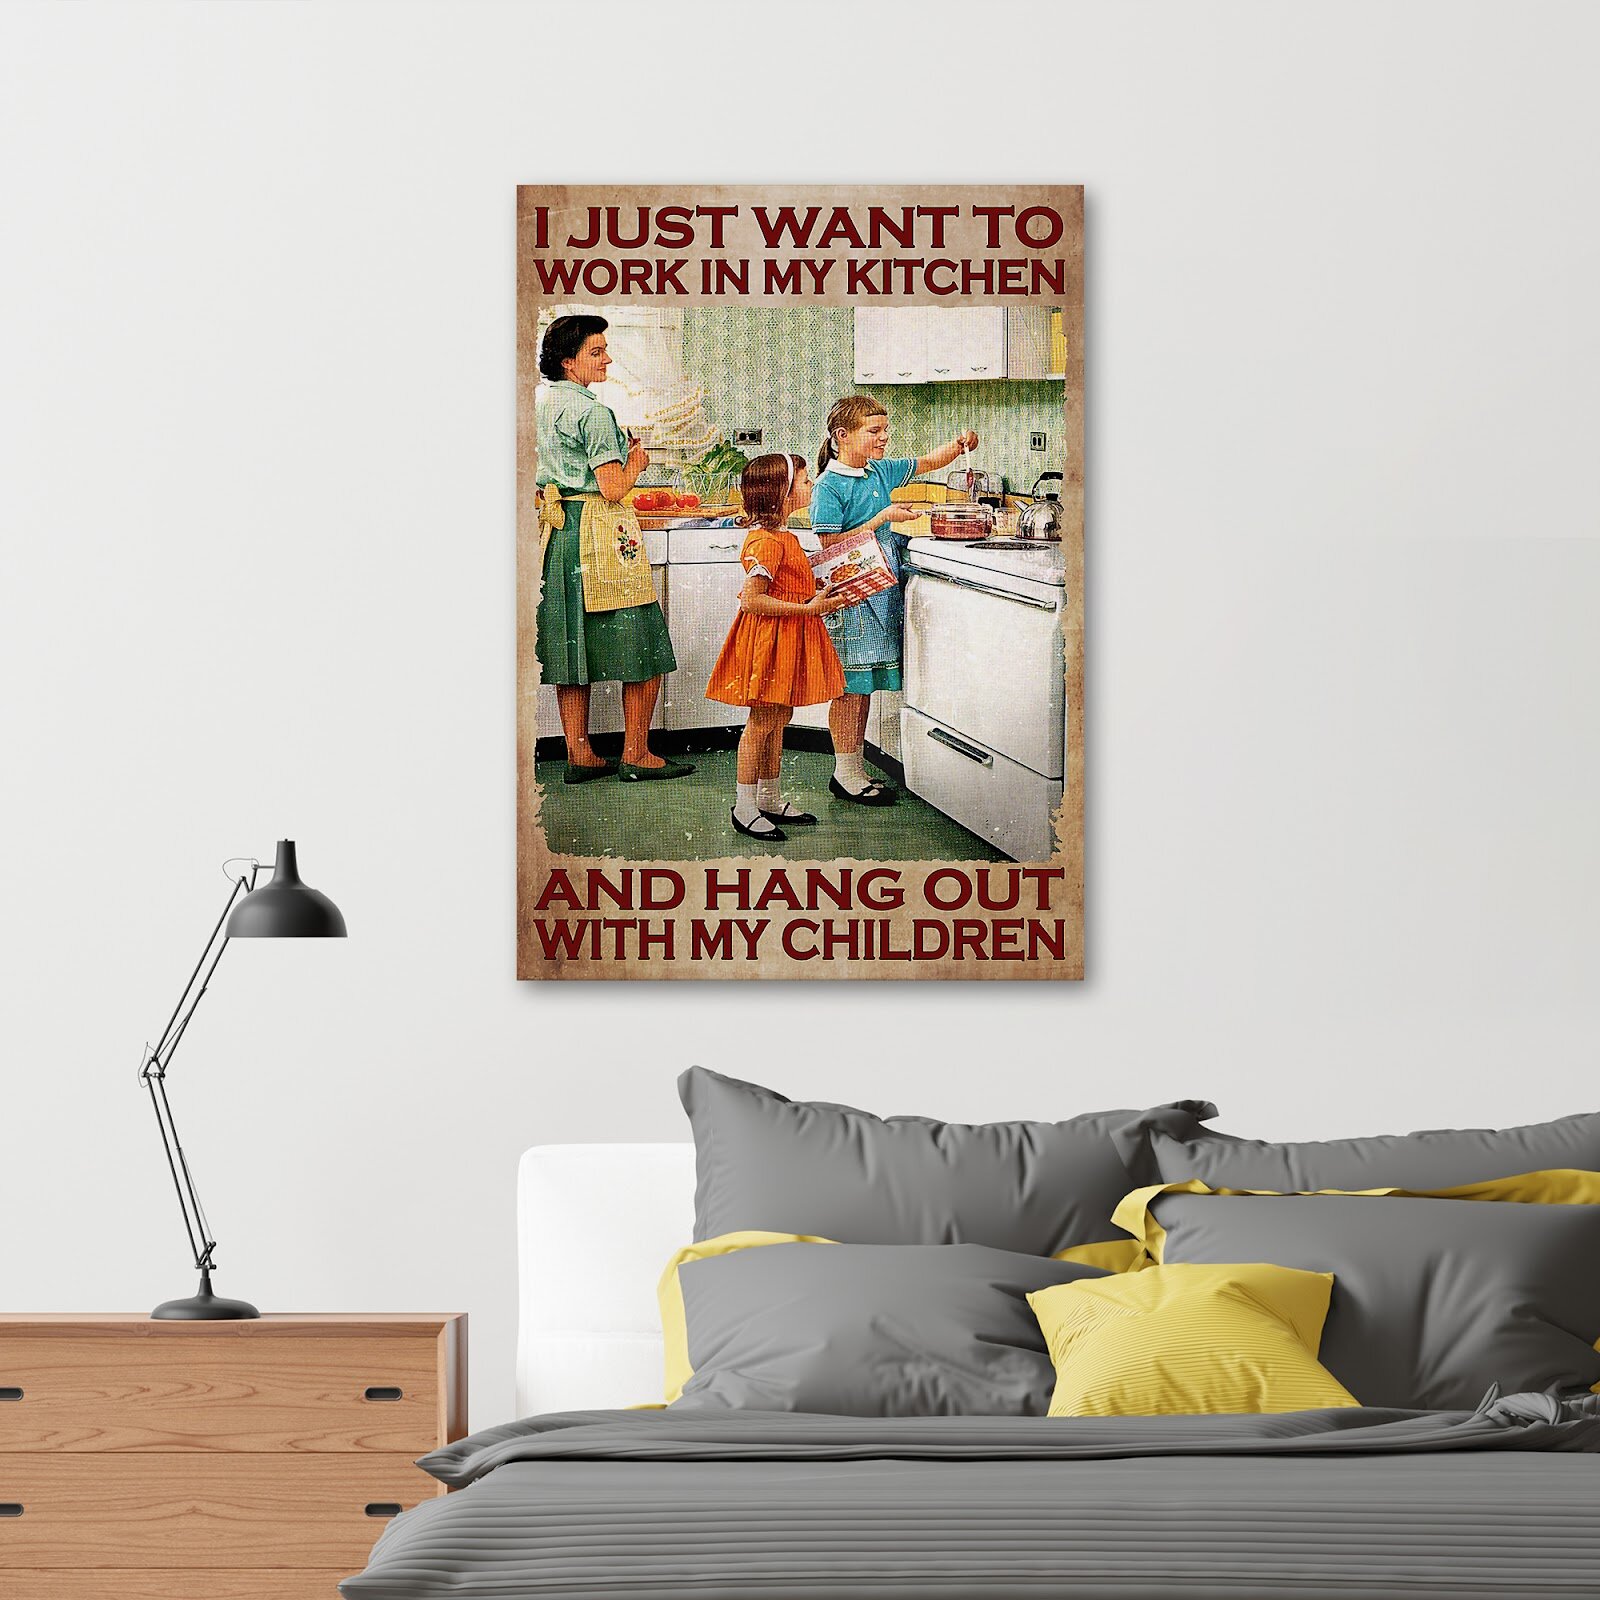 My Sewing Room Rules - 1 Piece Rectangle Graphic Art Print on Wrapped Canvas Trinx Size: 14'' H x 11'' W x 1.25 D